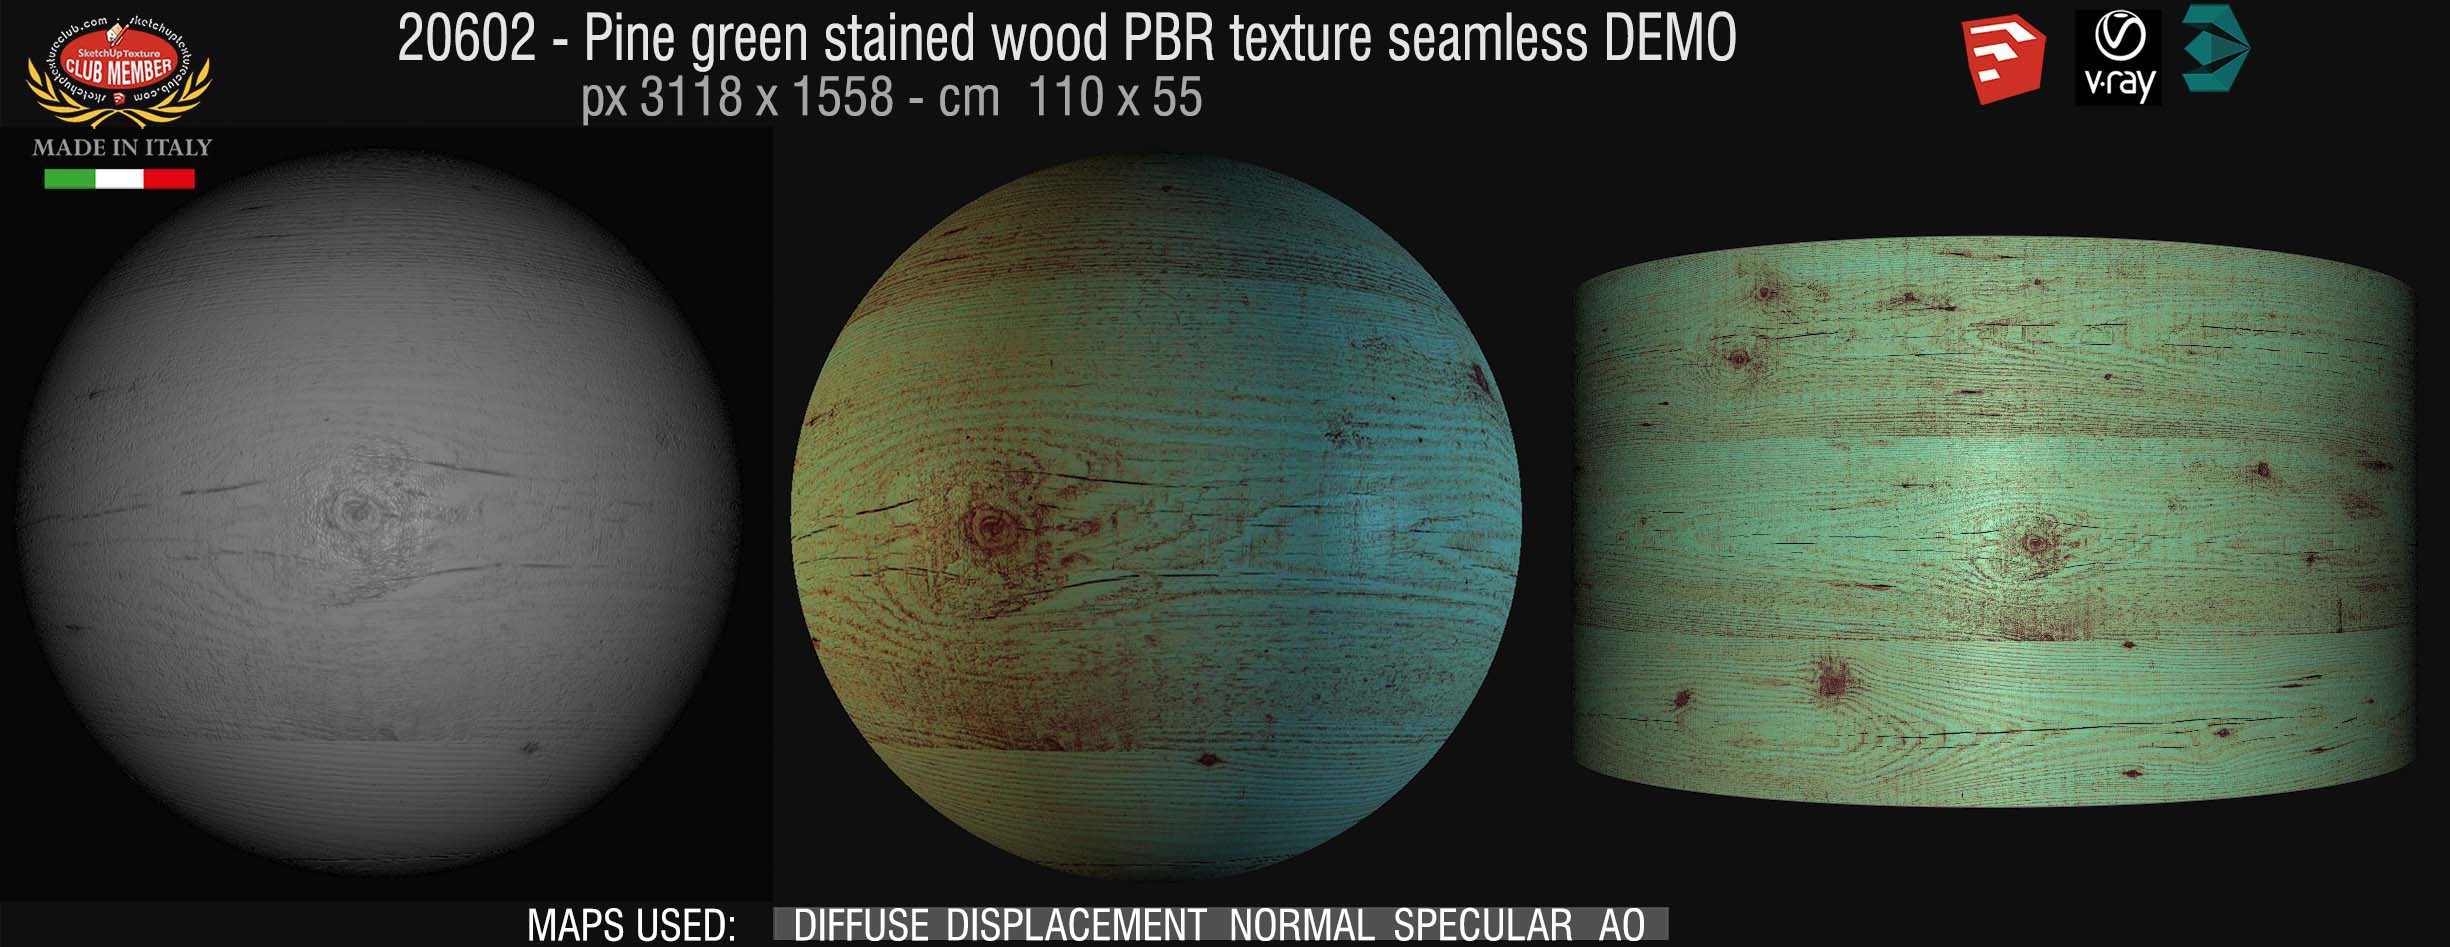 20602 Pine green stained wood PBR texture seamless DEMO